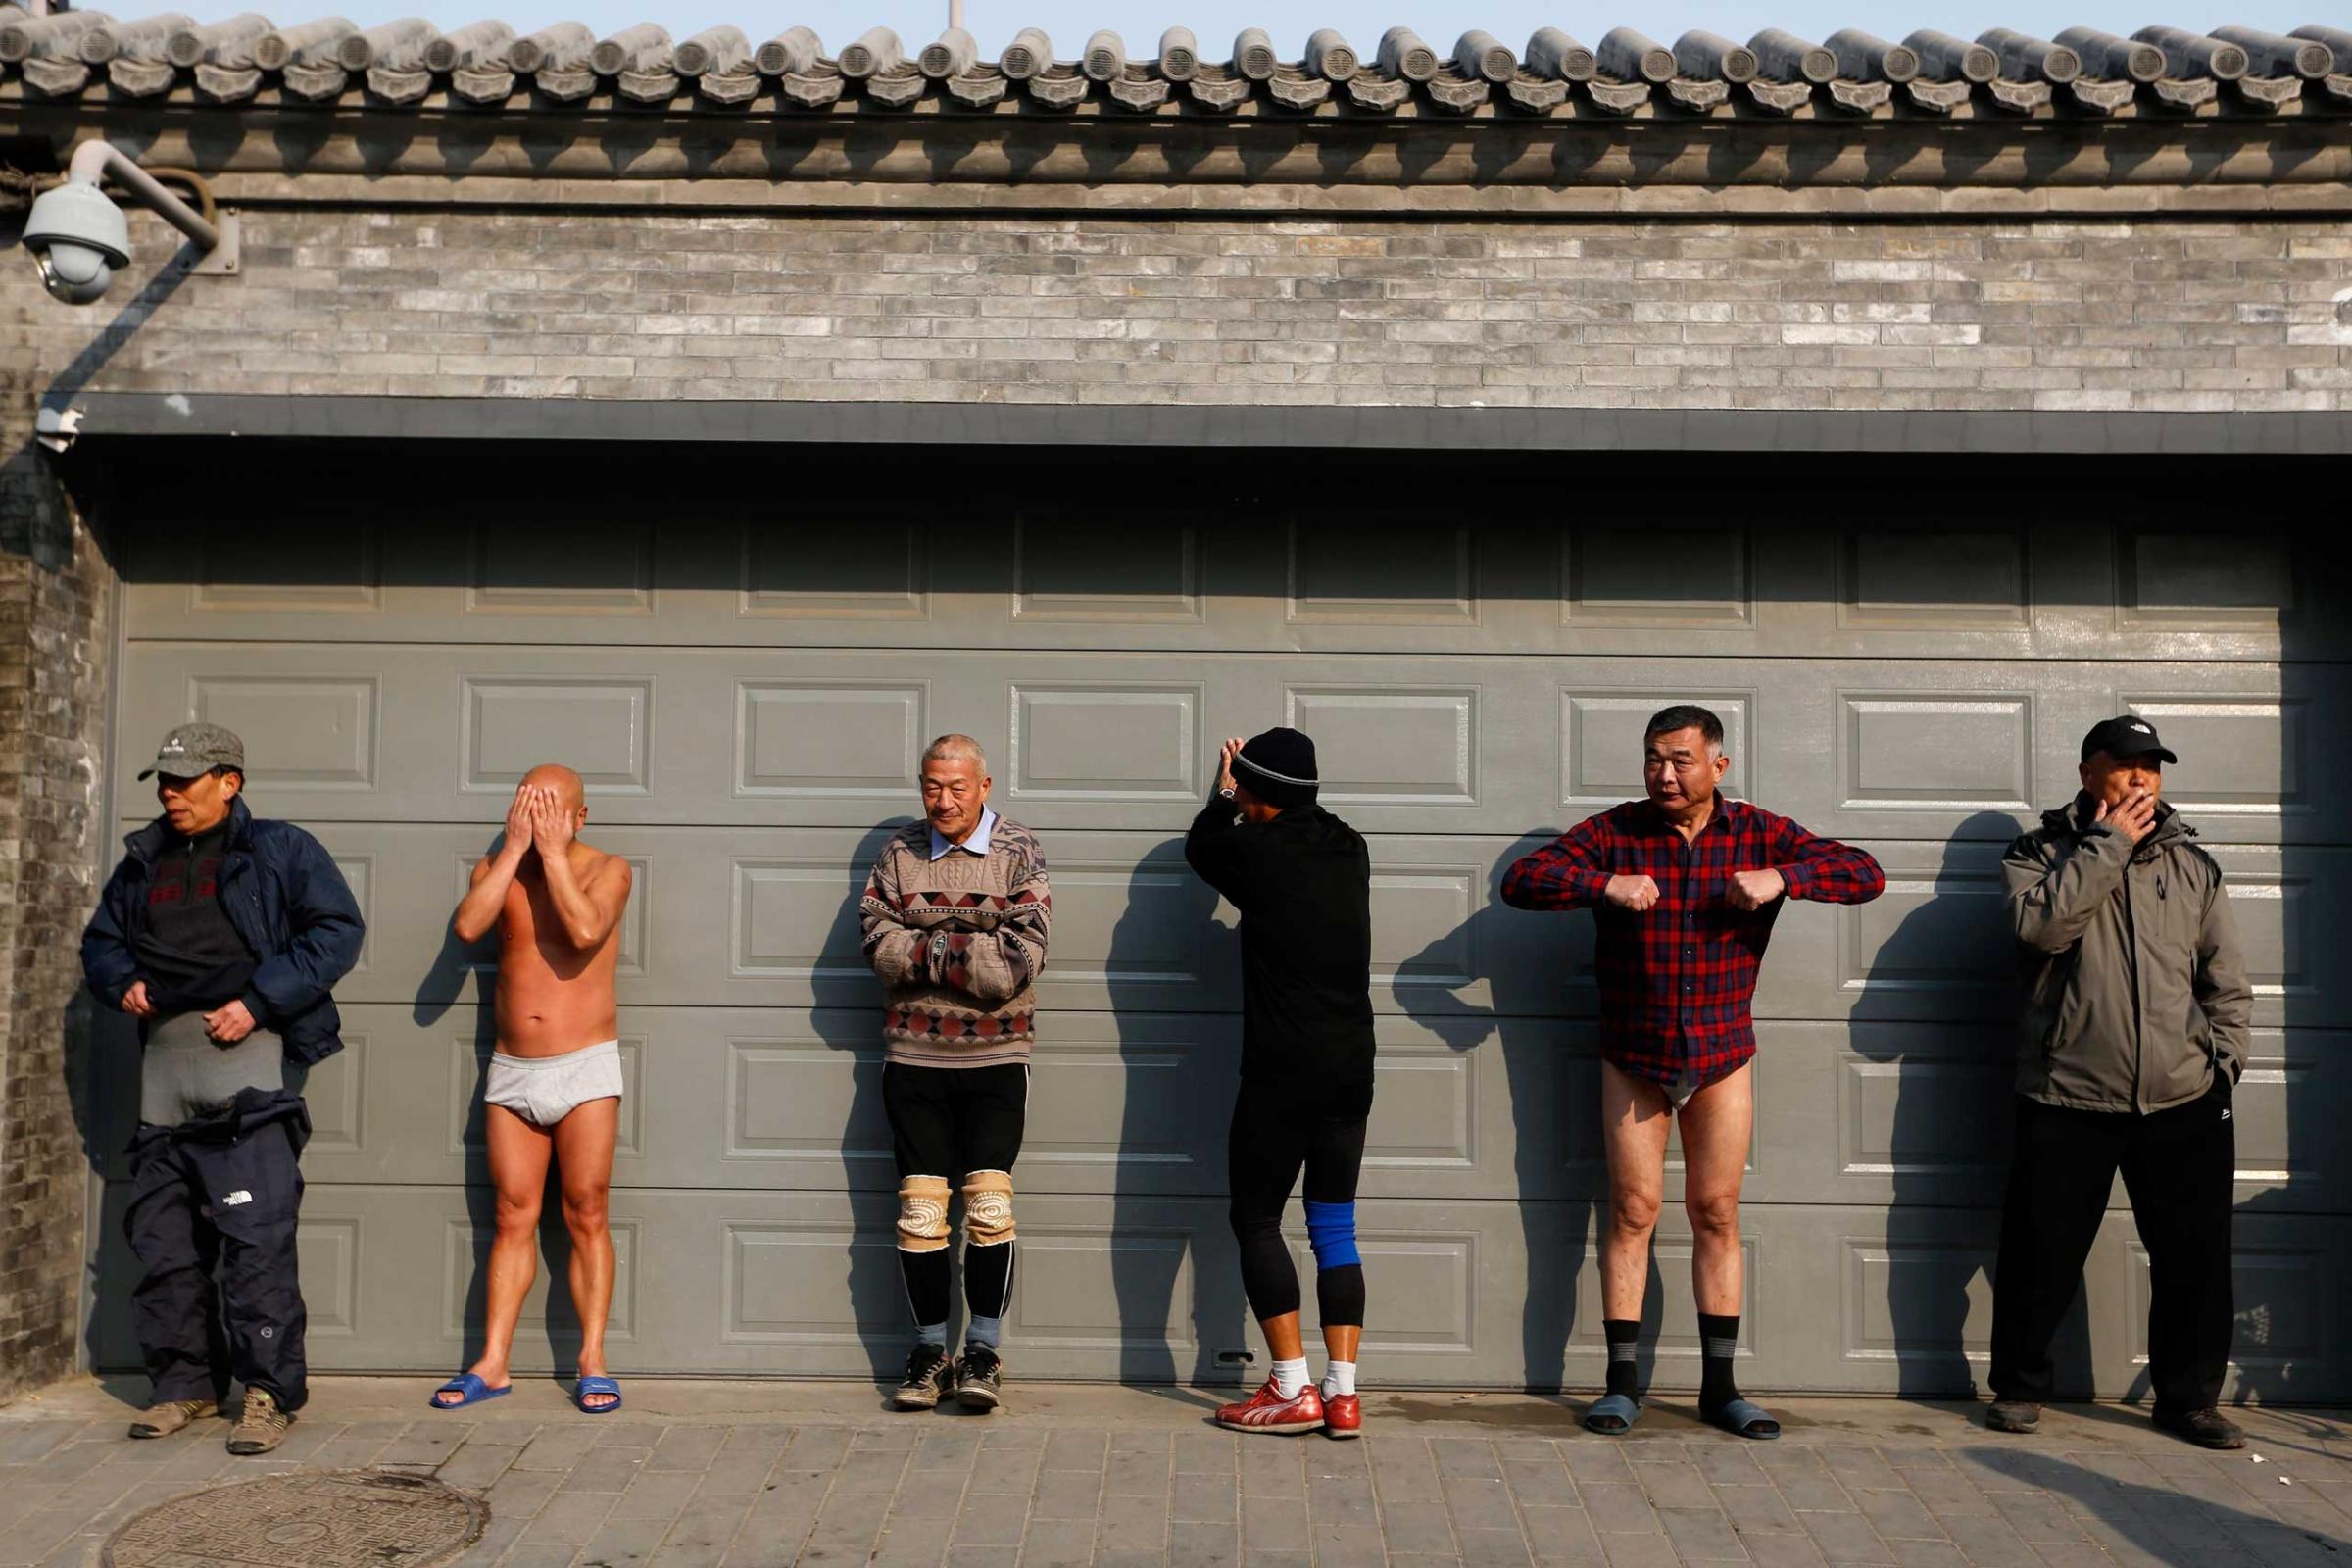 Jan. 12, 2015. Chinese winter swimming enthusiasts warm up before swimming in the half-frozen Houhai lake with a water temperature around 36 fahrenheit in Beijing.